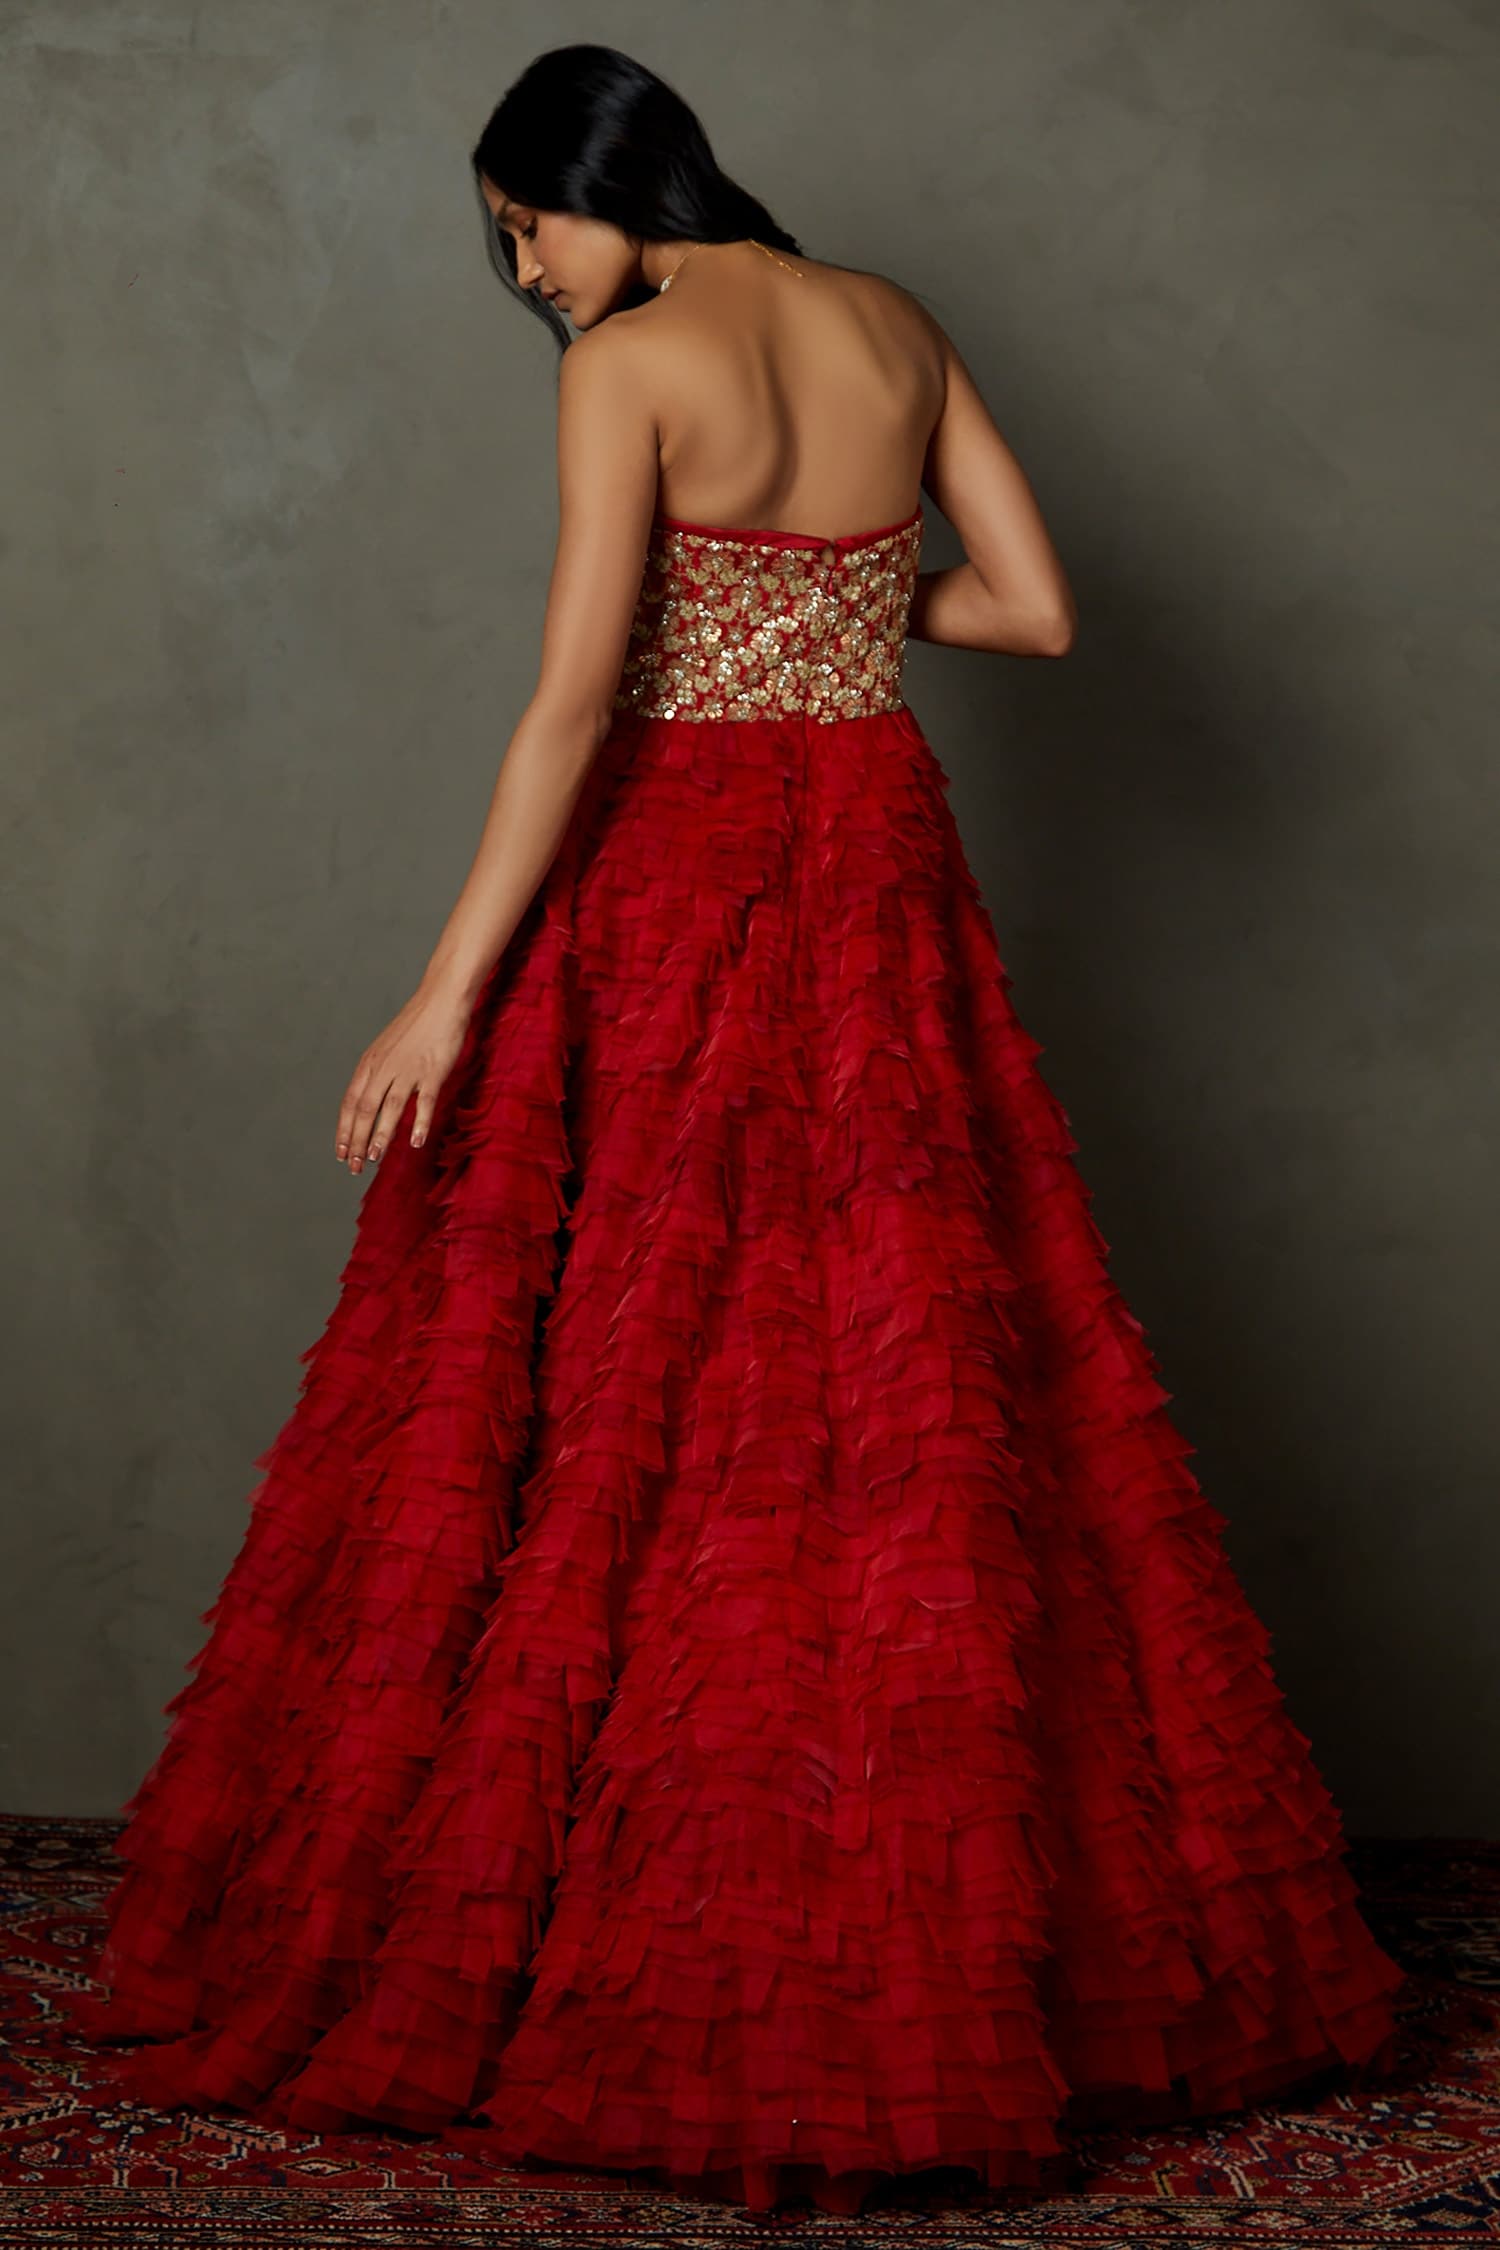 Couture Red Contemporary Ballgown by Desiree Spice | Bridestory.com